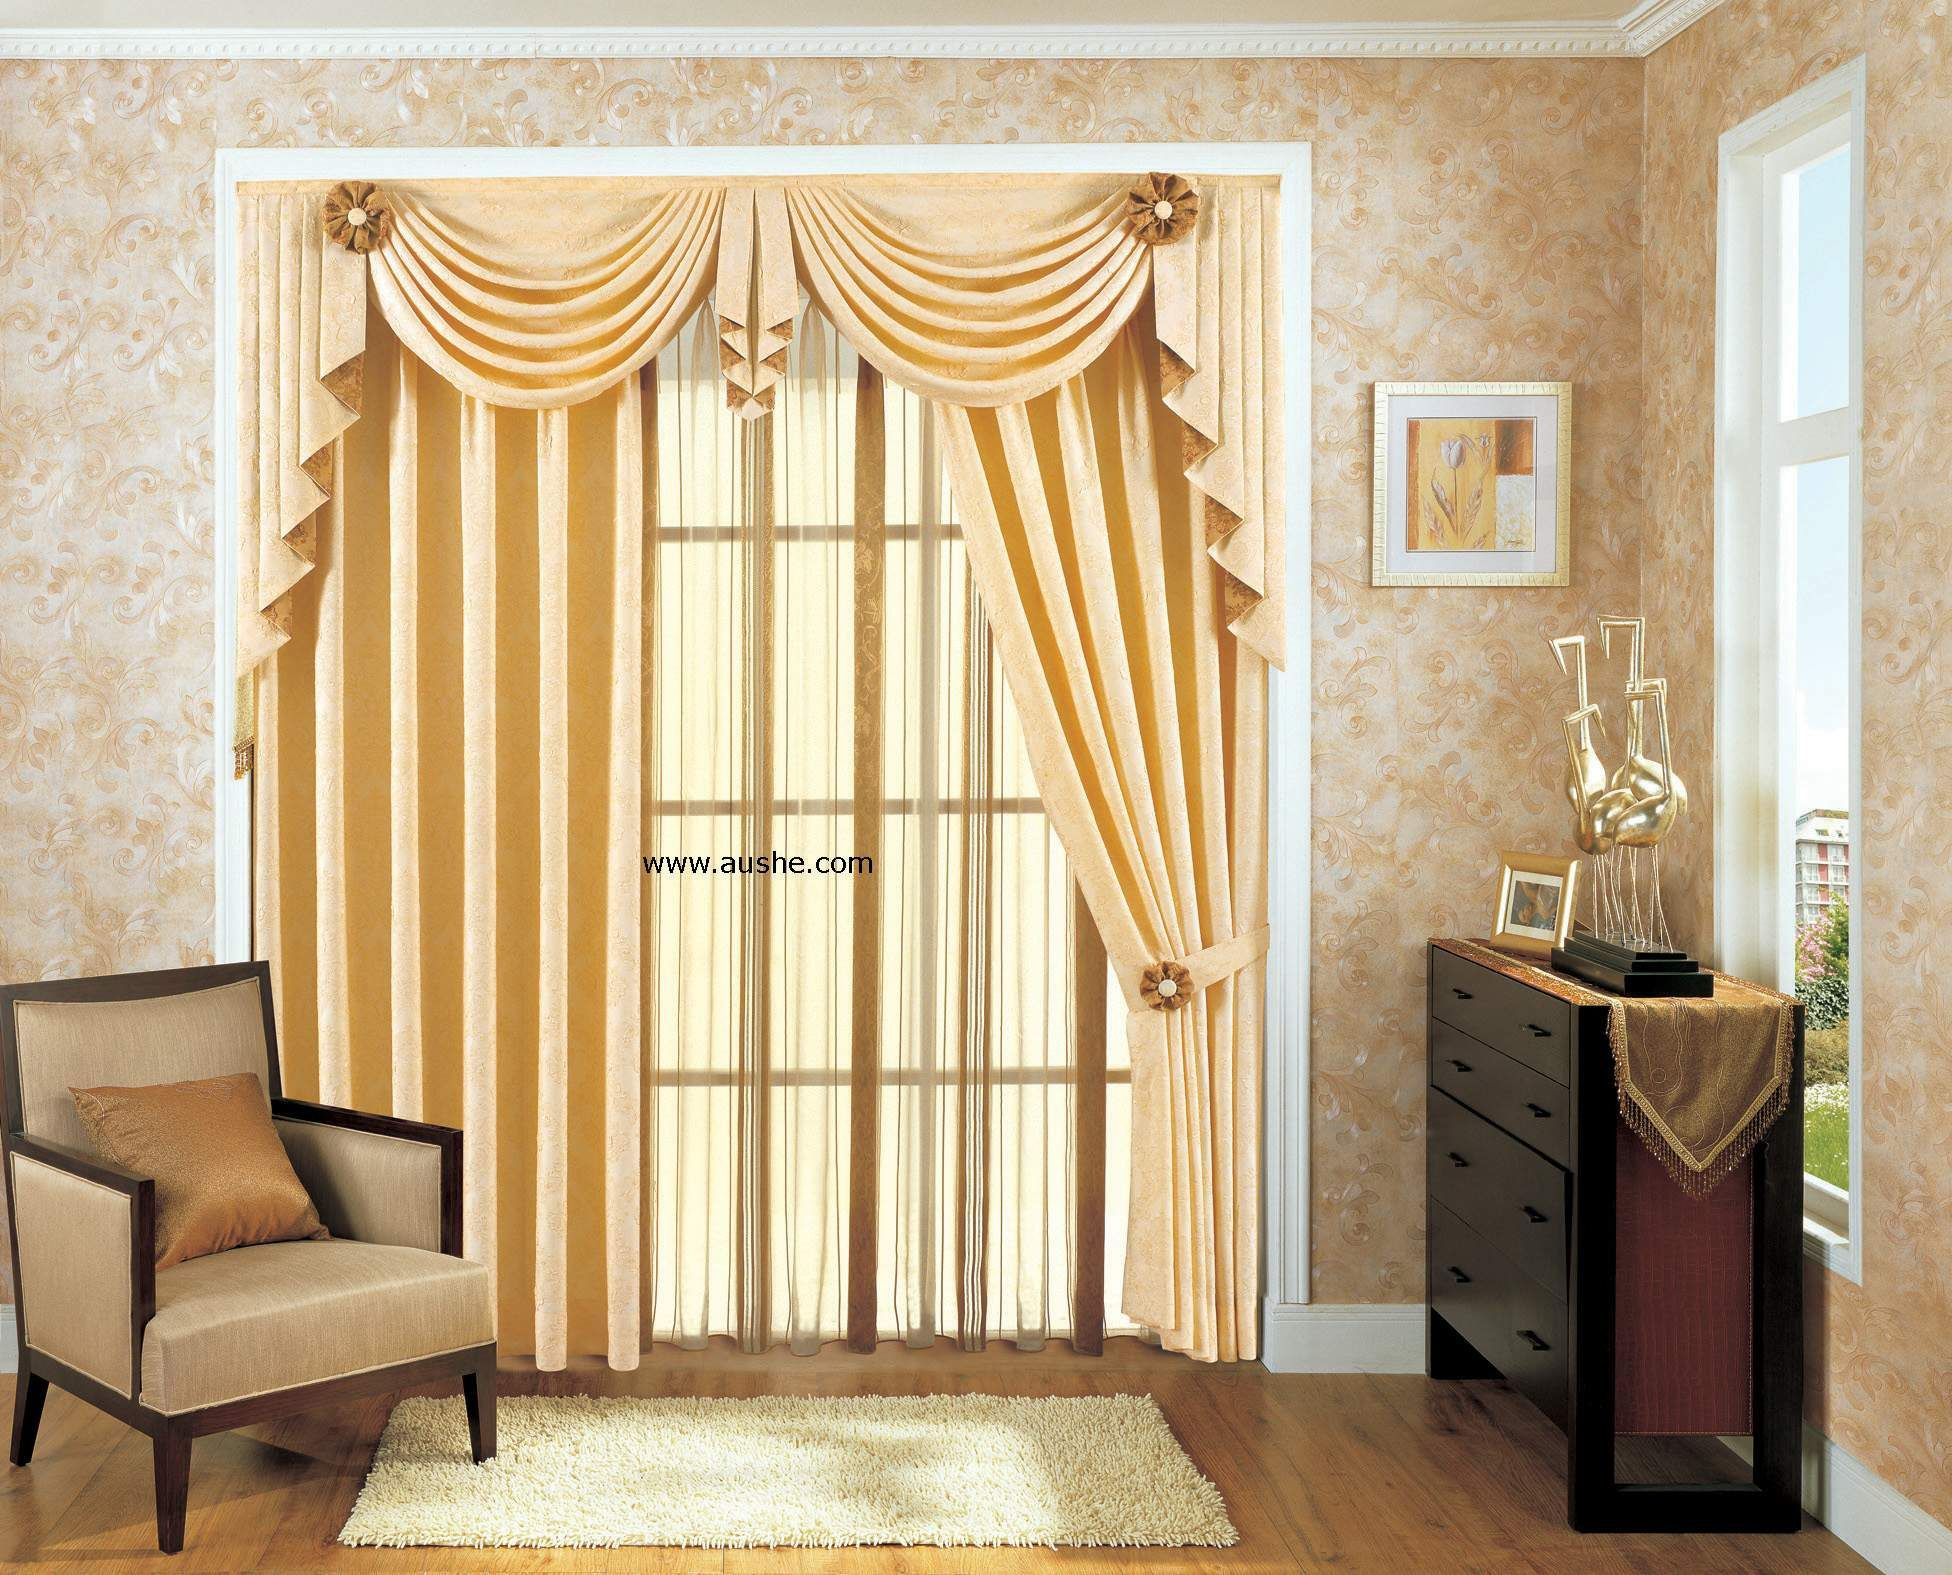 Fancy Living Room Curtains
 Matching Wallpaper And Curtains For Living Room Homebase